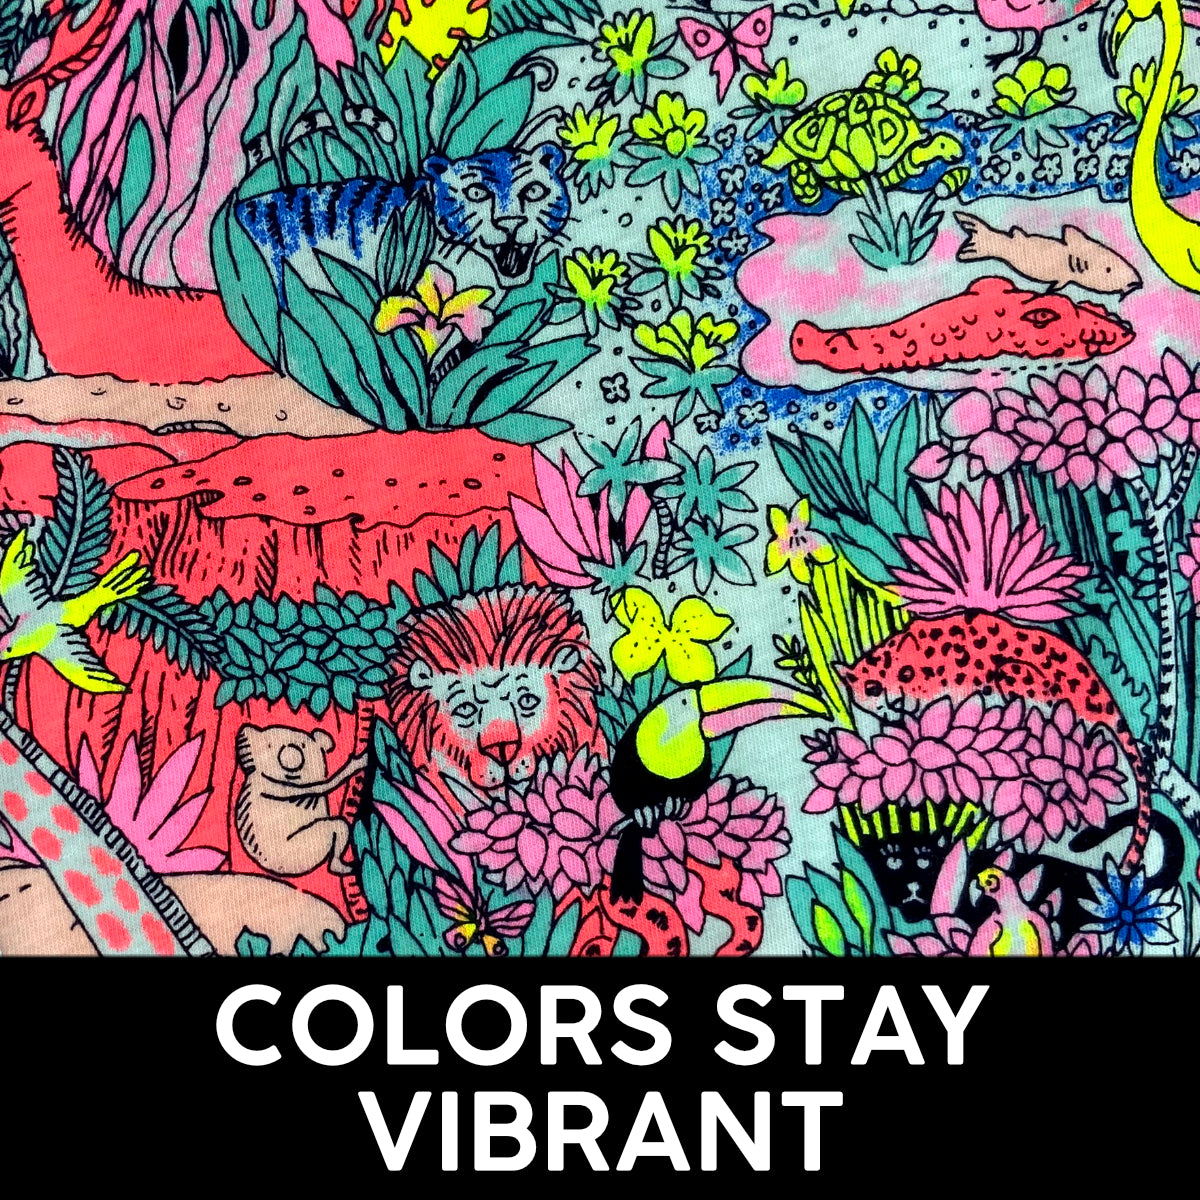 By using  high quality dyes on premium 100% cotton, our vibrant prints are designed to stay bold and colorful wash after wash!